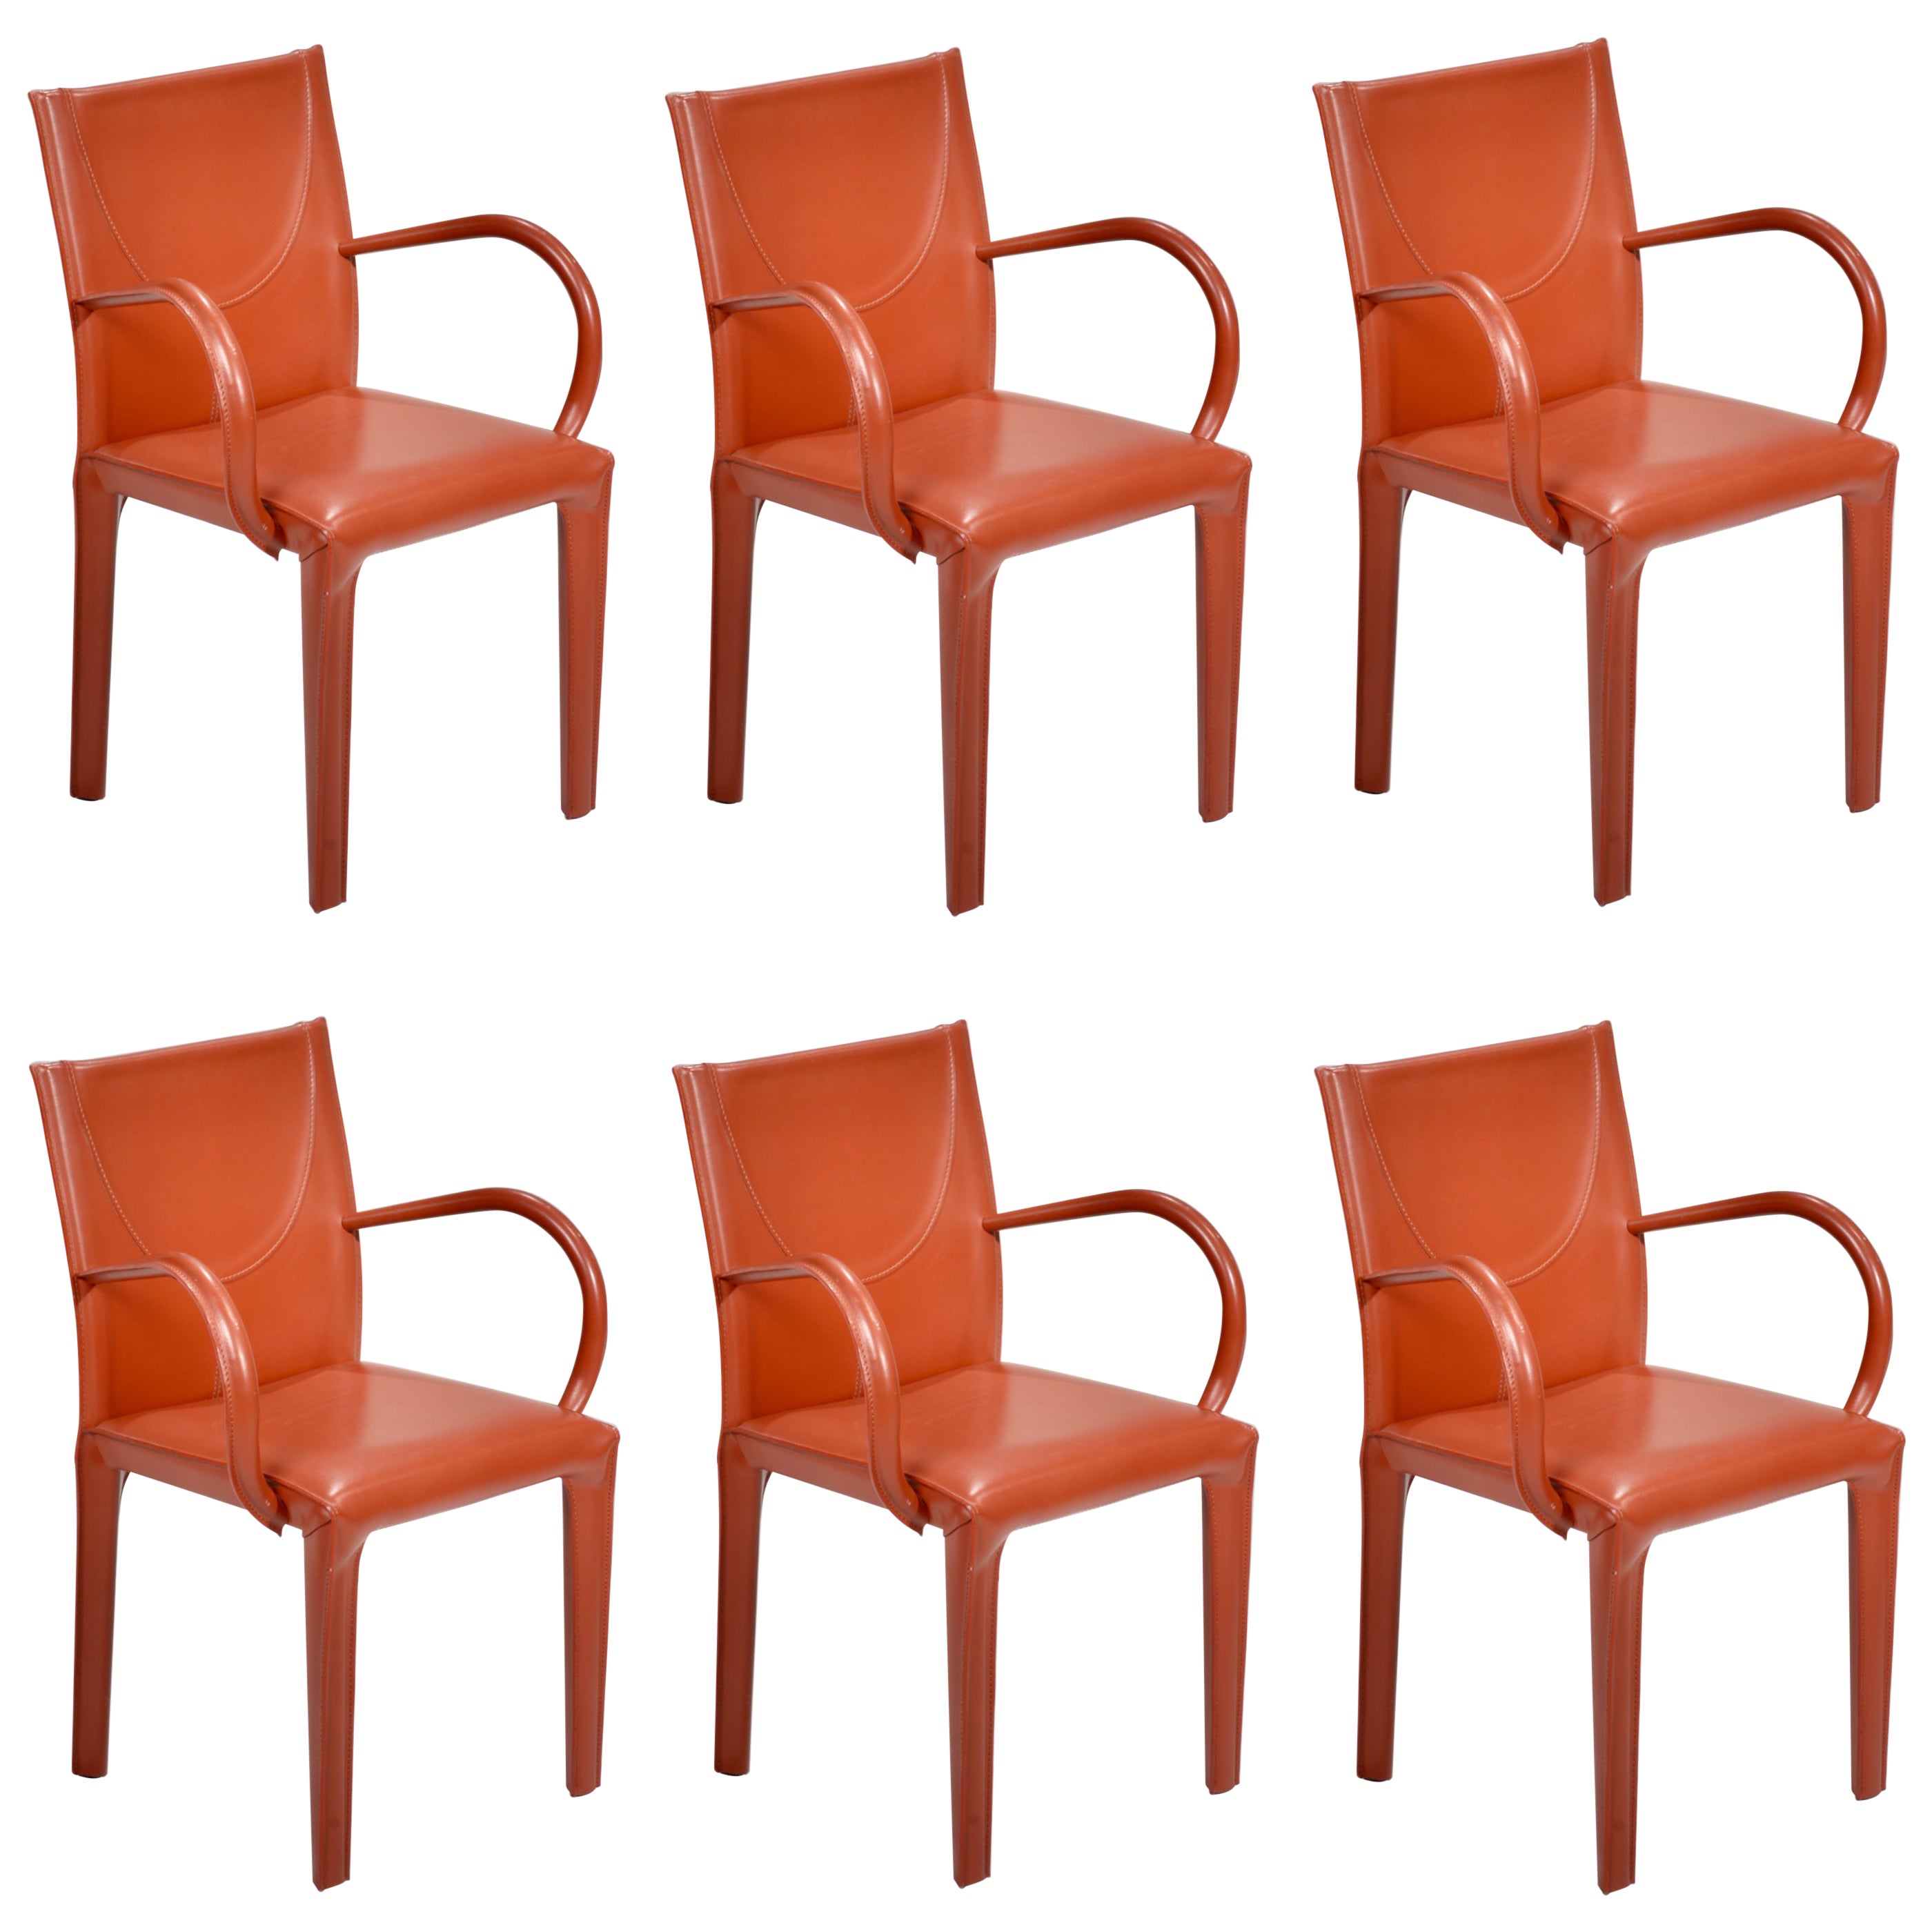 Set of 6 Italian Post Modern Leather Dining Armchairs by Arper, c1985 For Sale